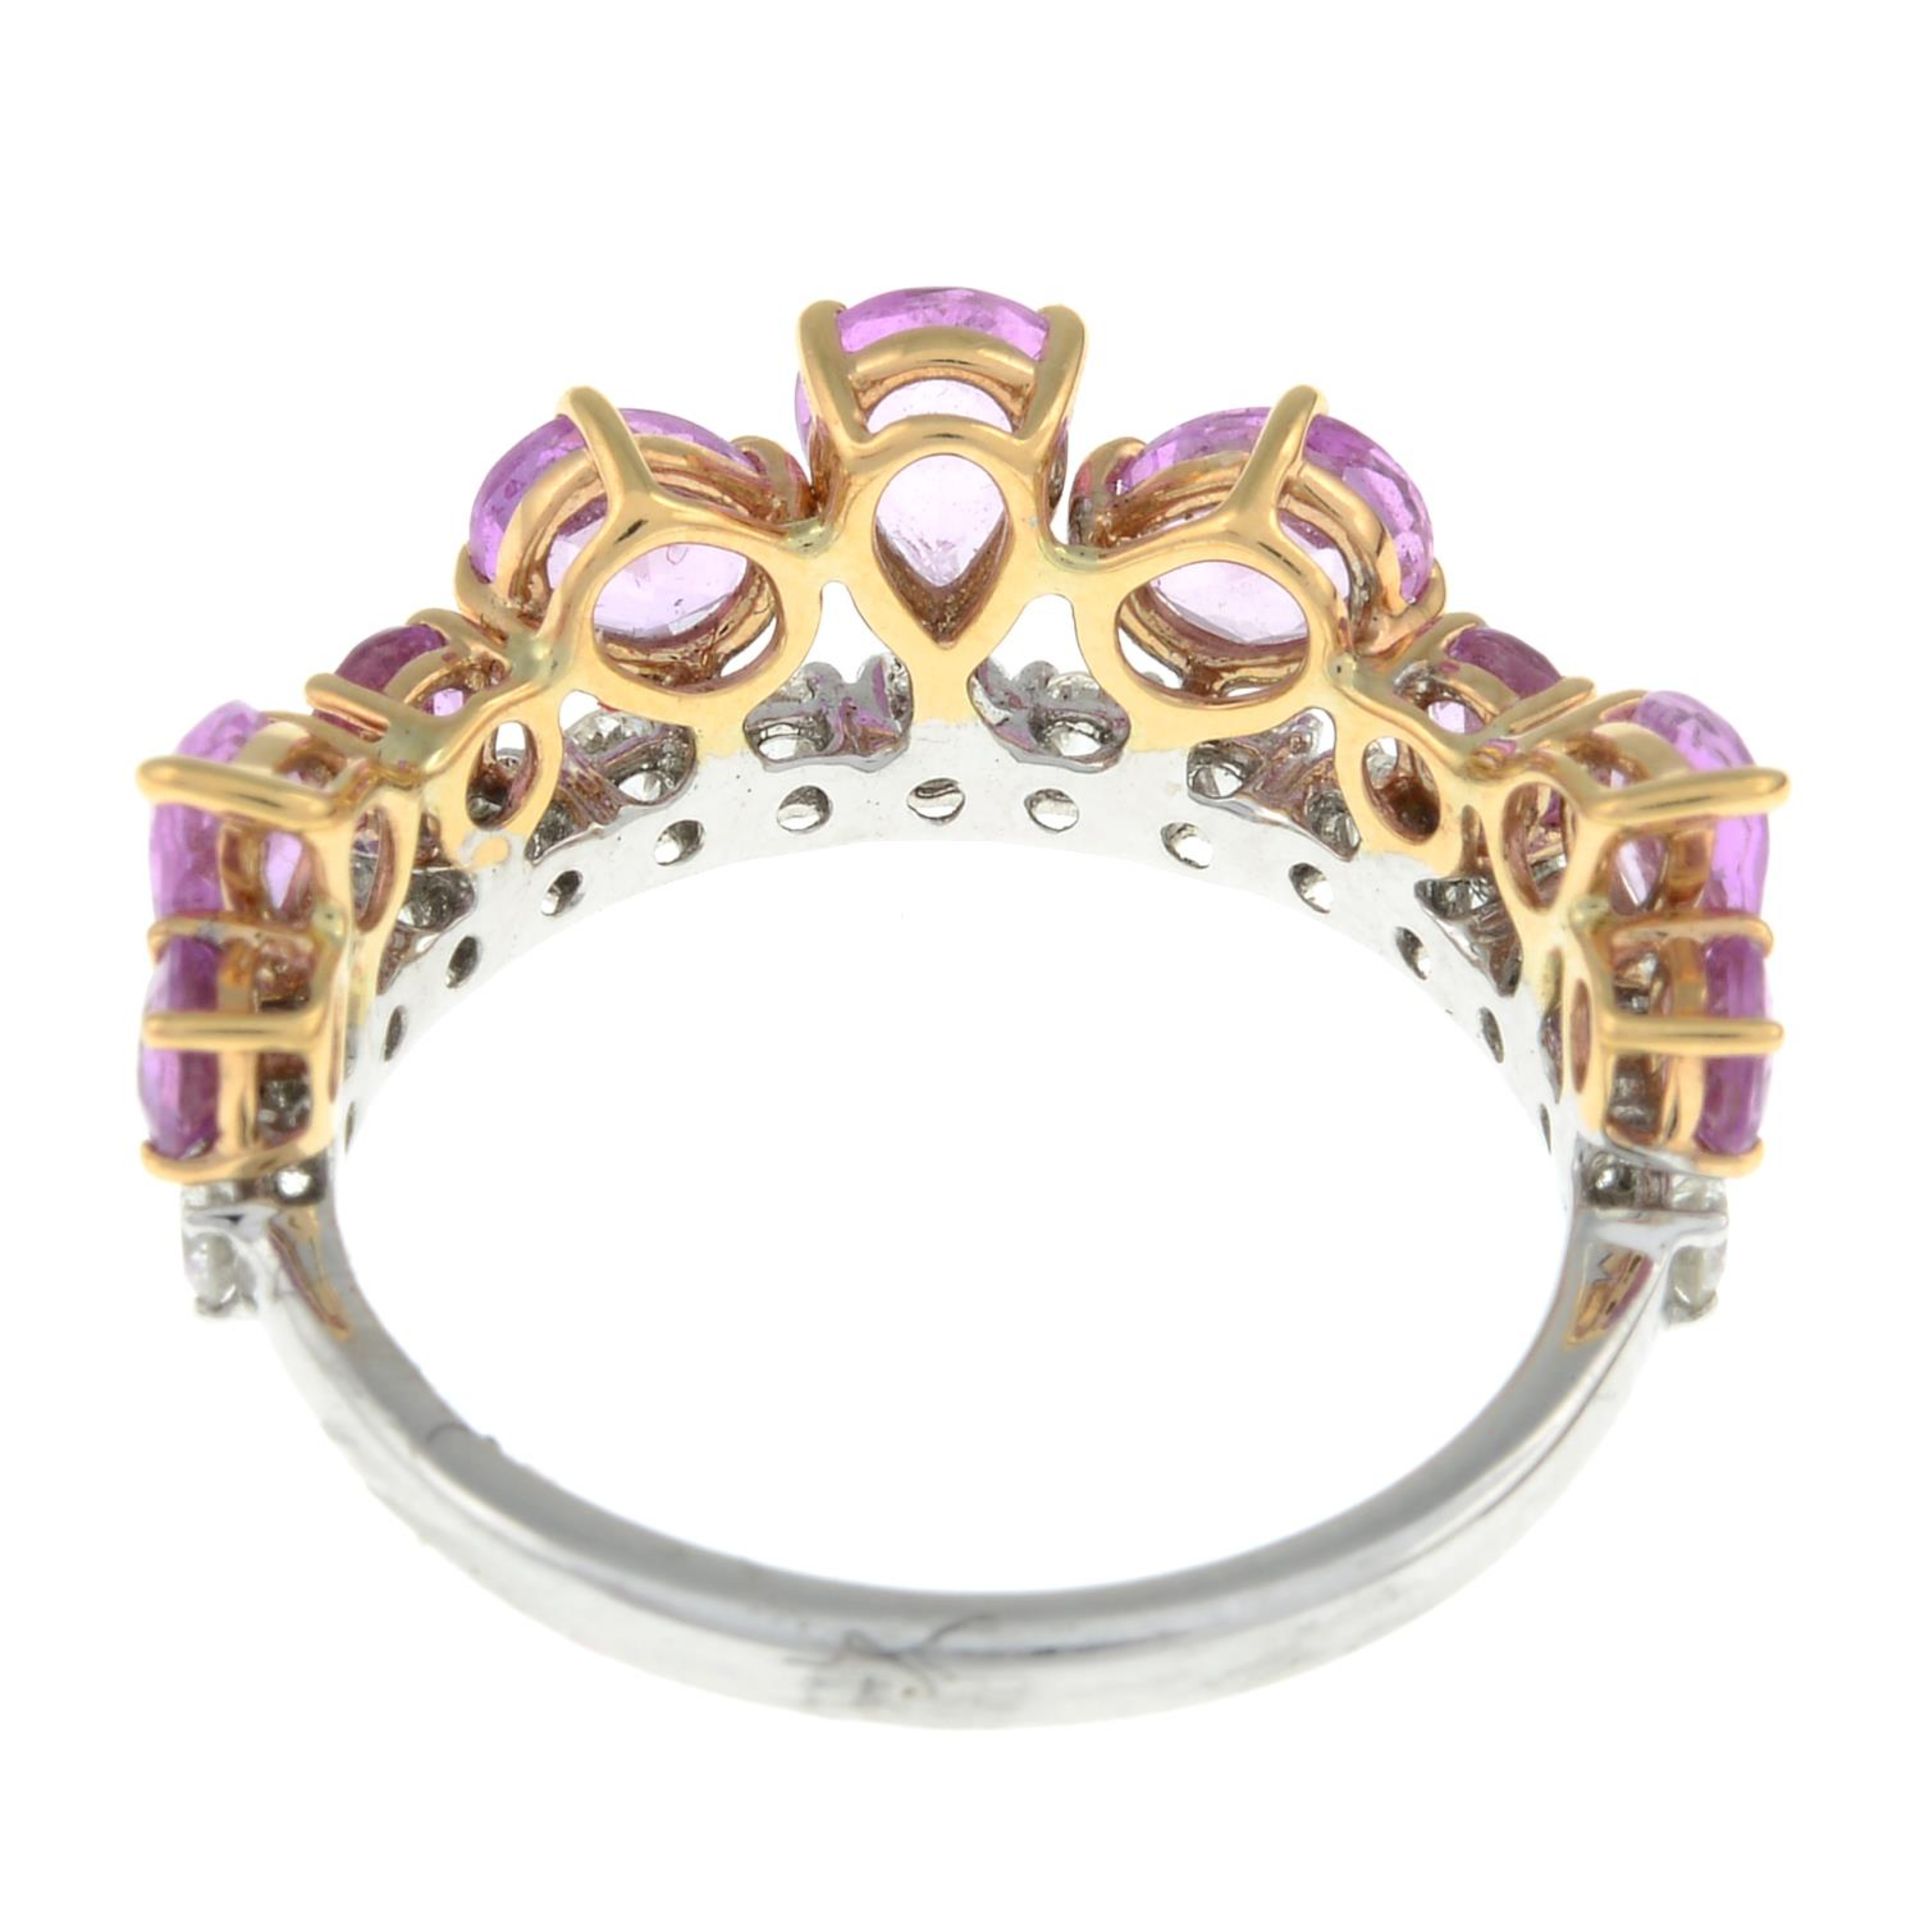 An 18ct gold pink sapphire and brilliant-cut diamond 'Beneath the Rose' tiara ring. - Image 3 of 3